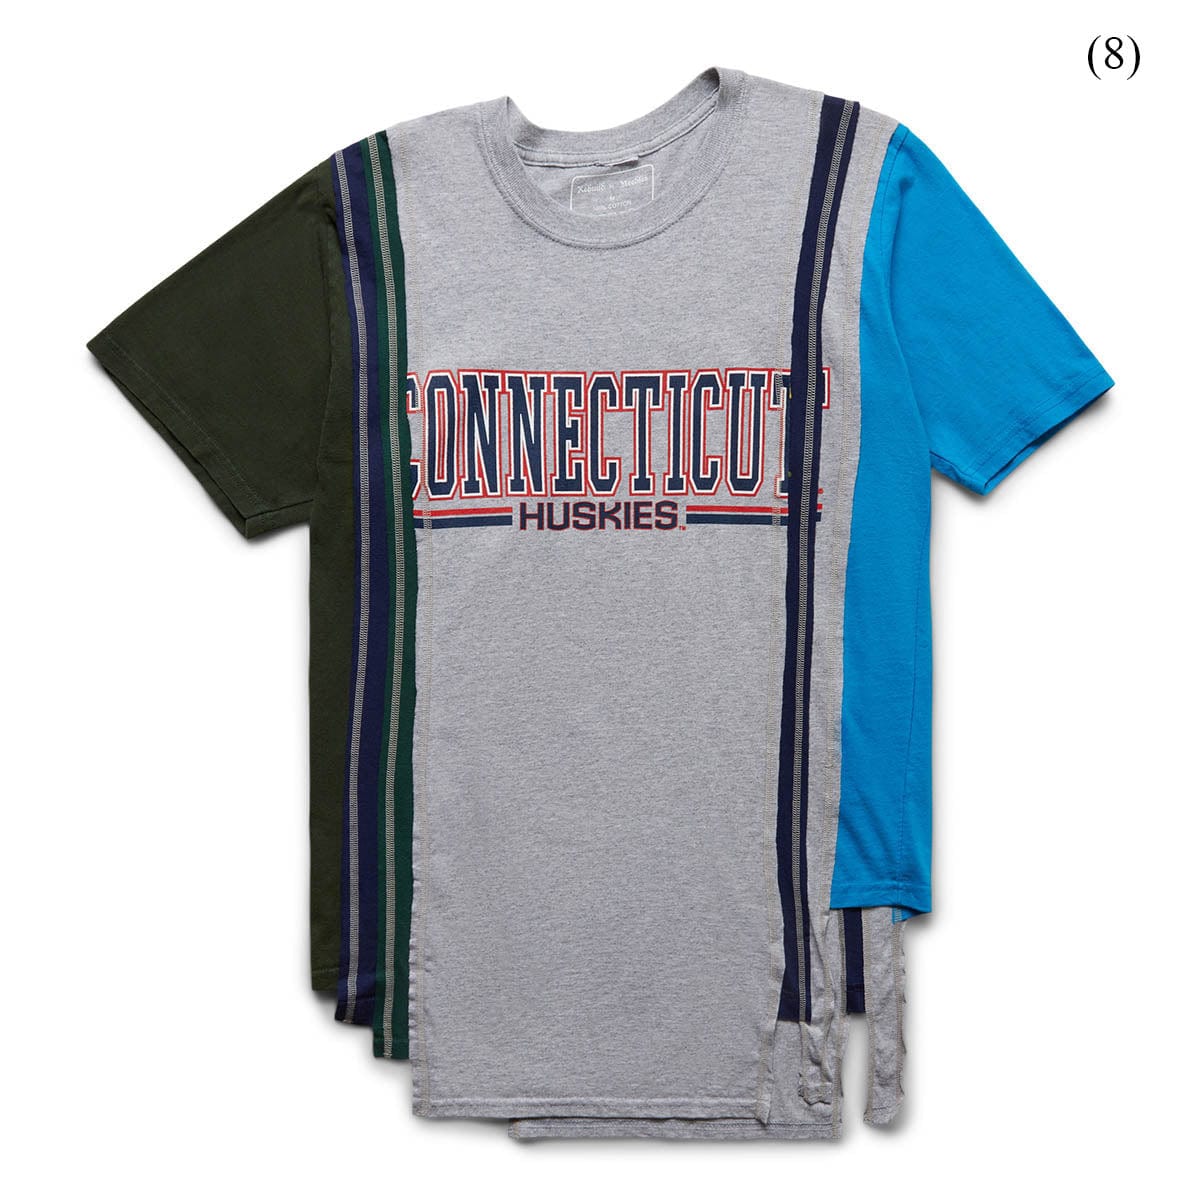 Needles T-Shirts ASSORTED 0999 / M (8) 7 CUTS S/S TEE - COLLEGE (M)